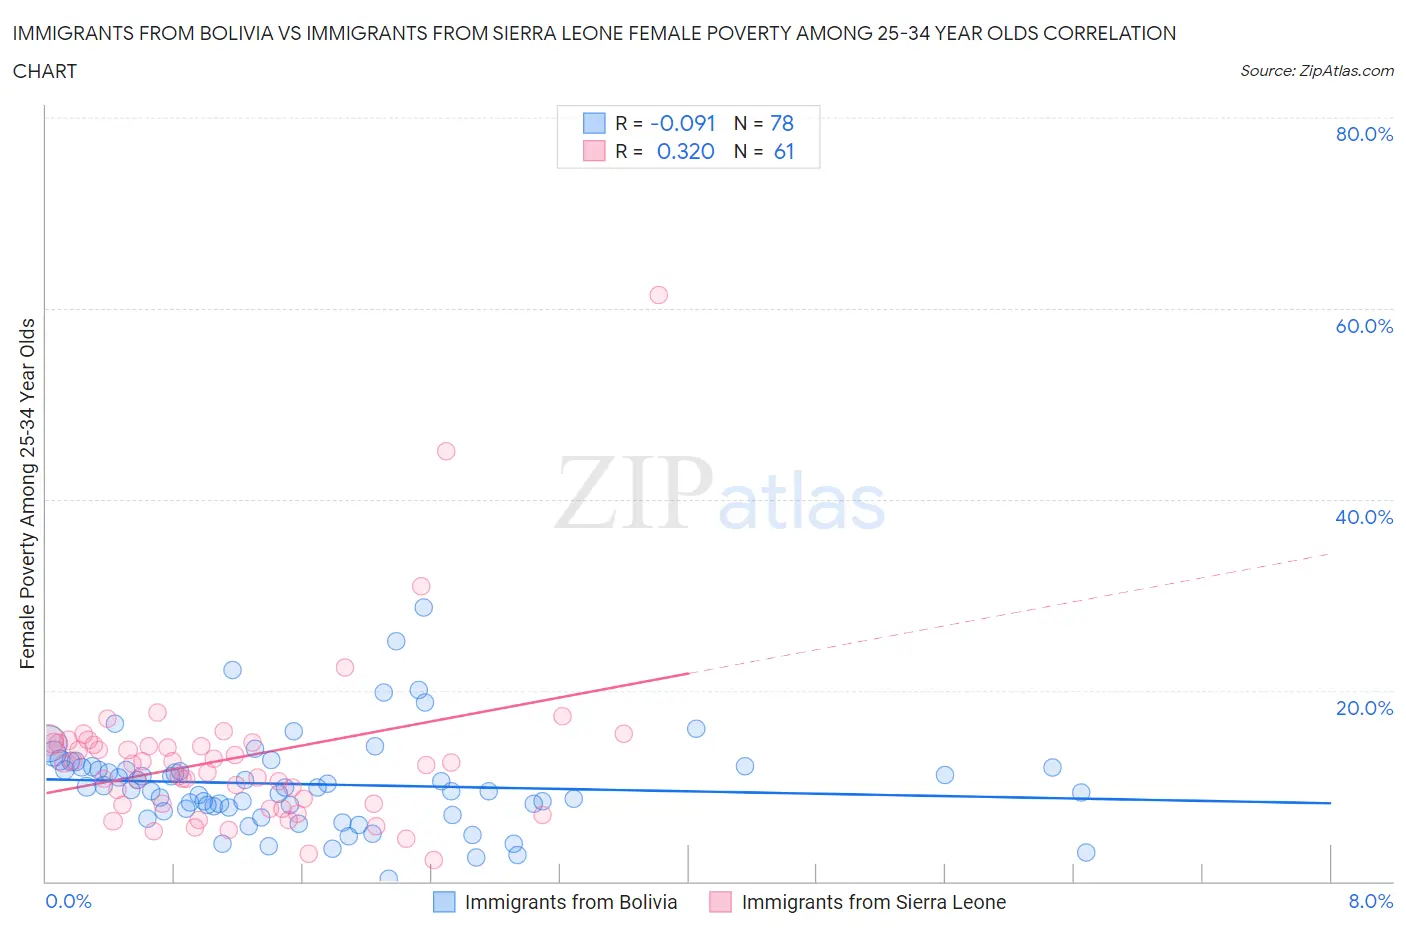 Immigrants from Bolivia vs Immigrants from Sierra Leone Female Poverty Among 25-34 Year Olds